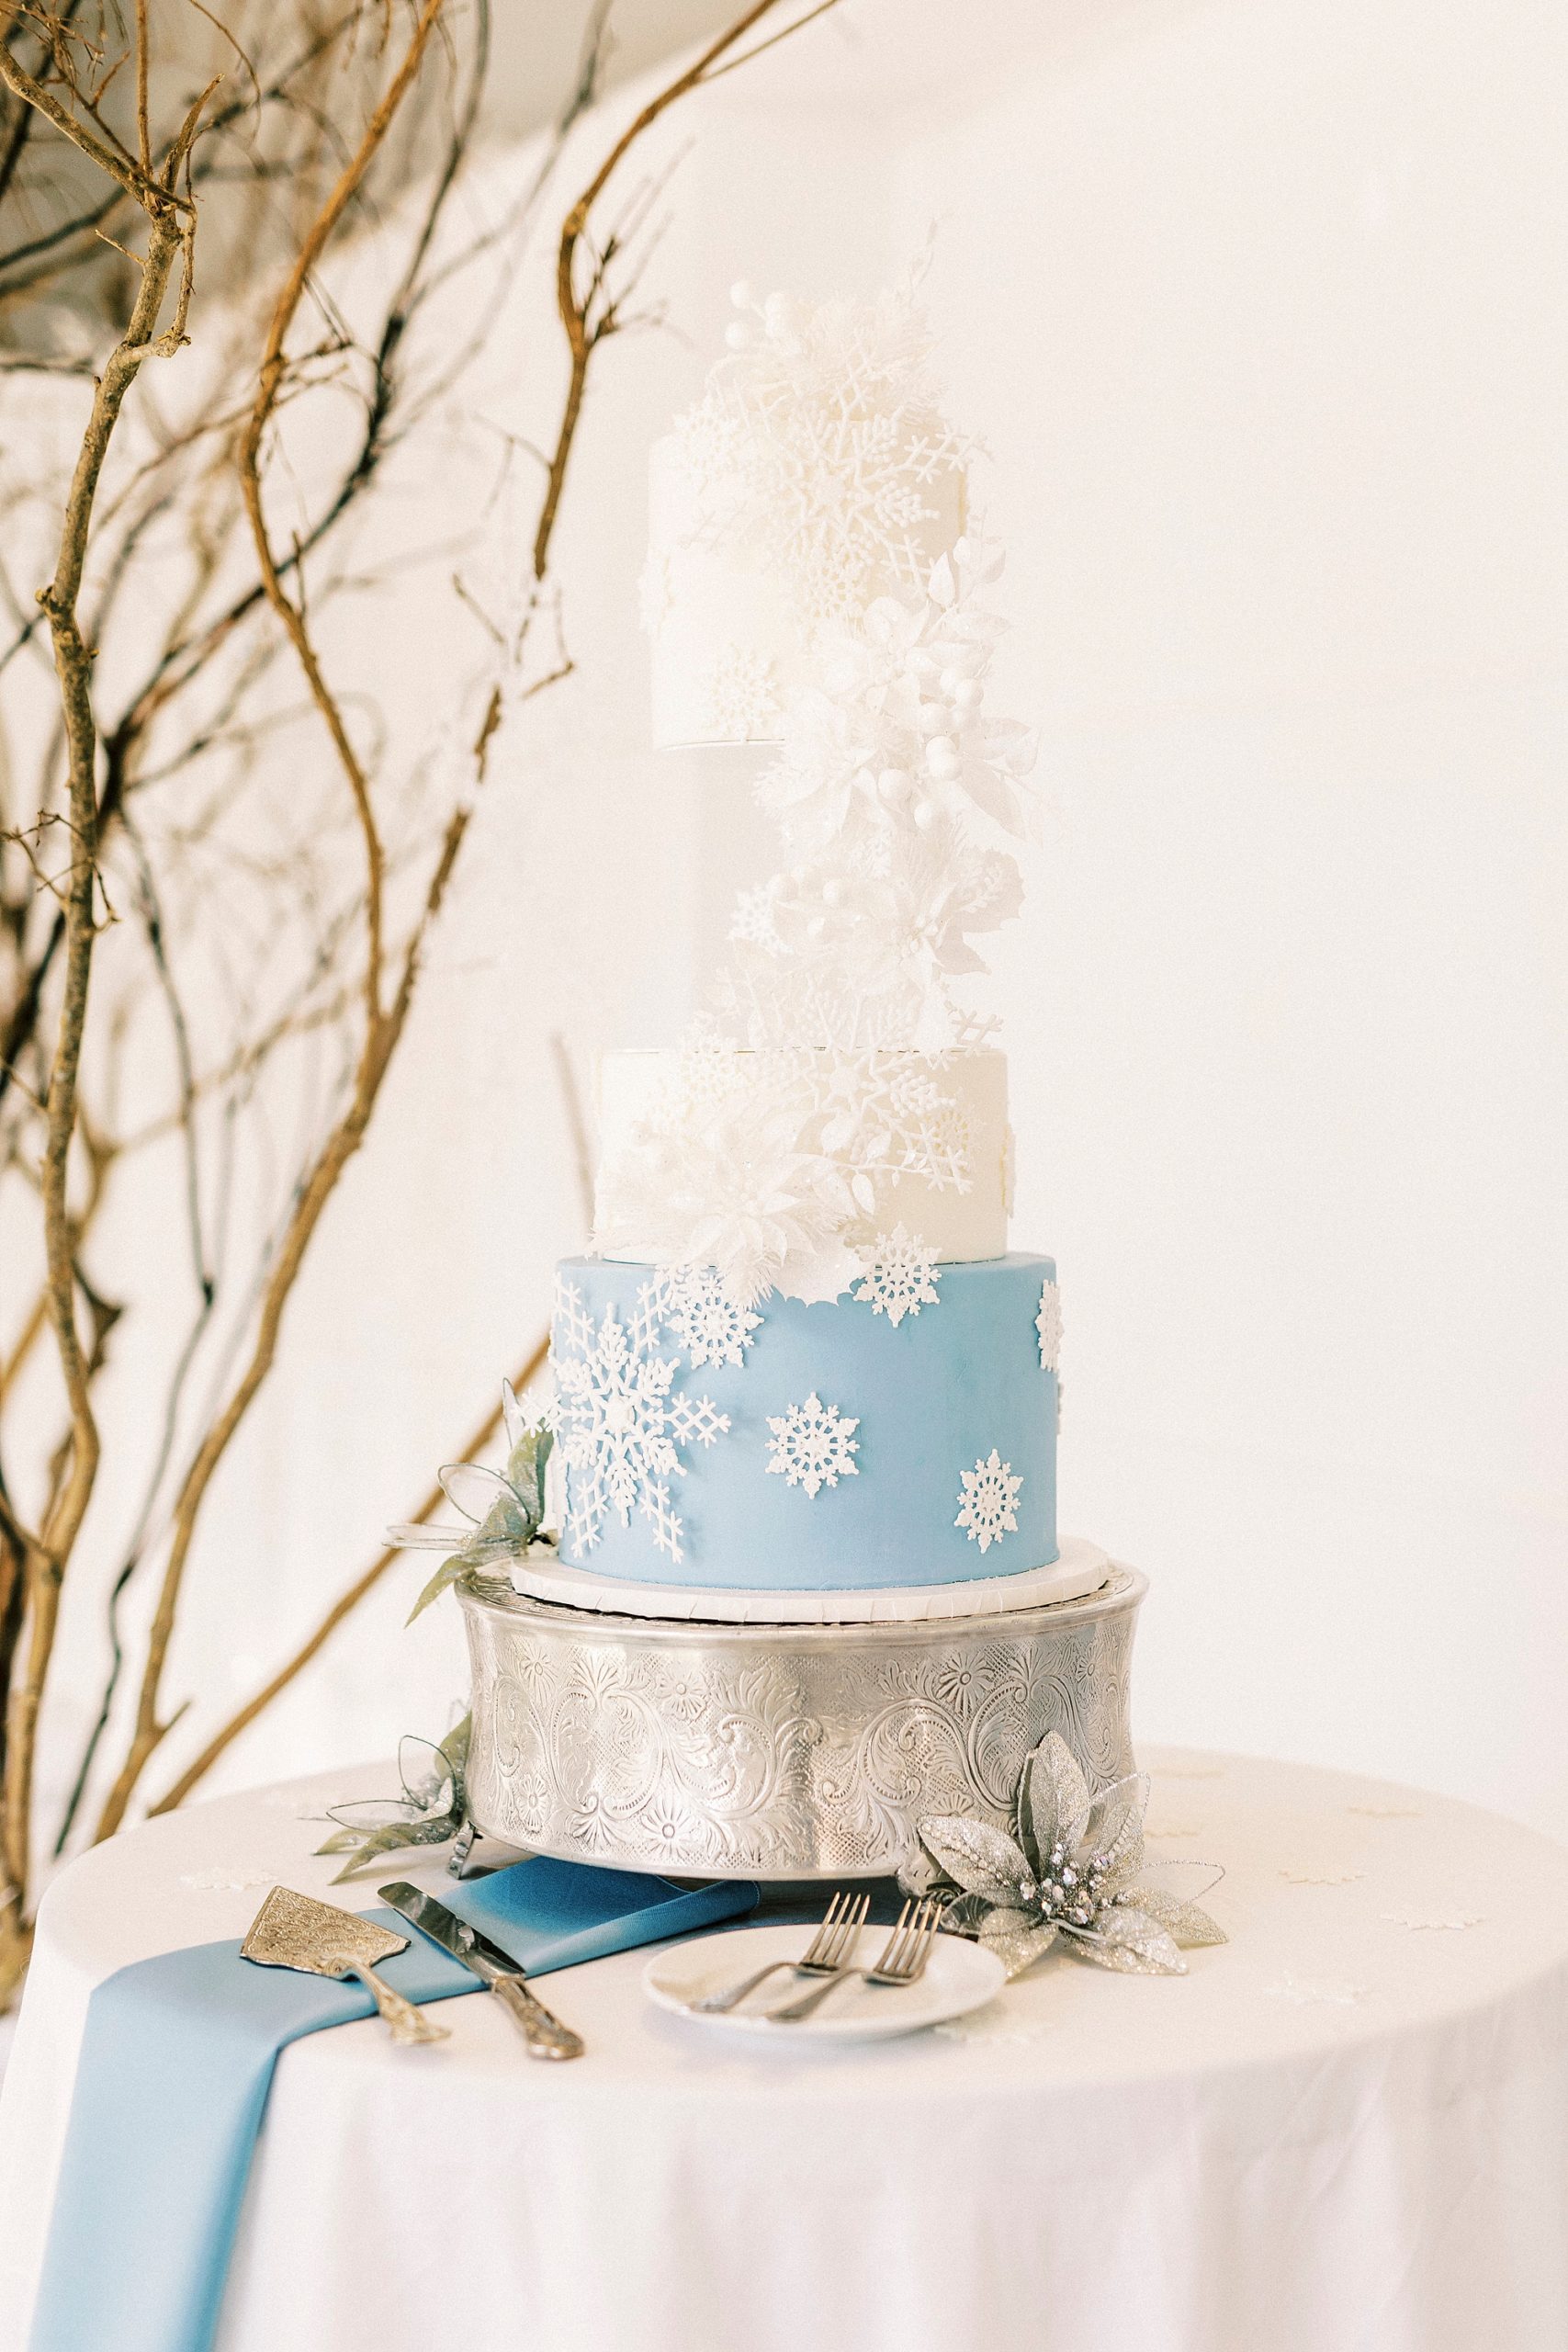 tiered wedding cake with blue tier and white snowflakes 